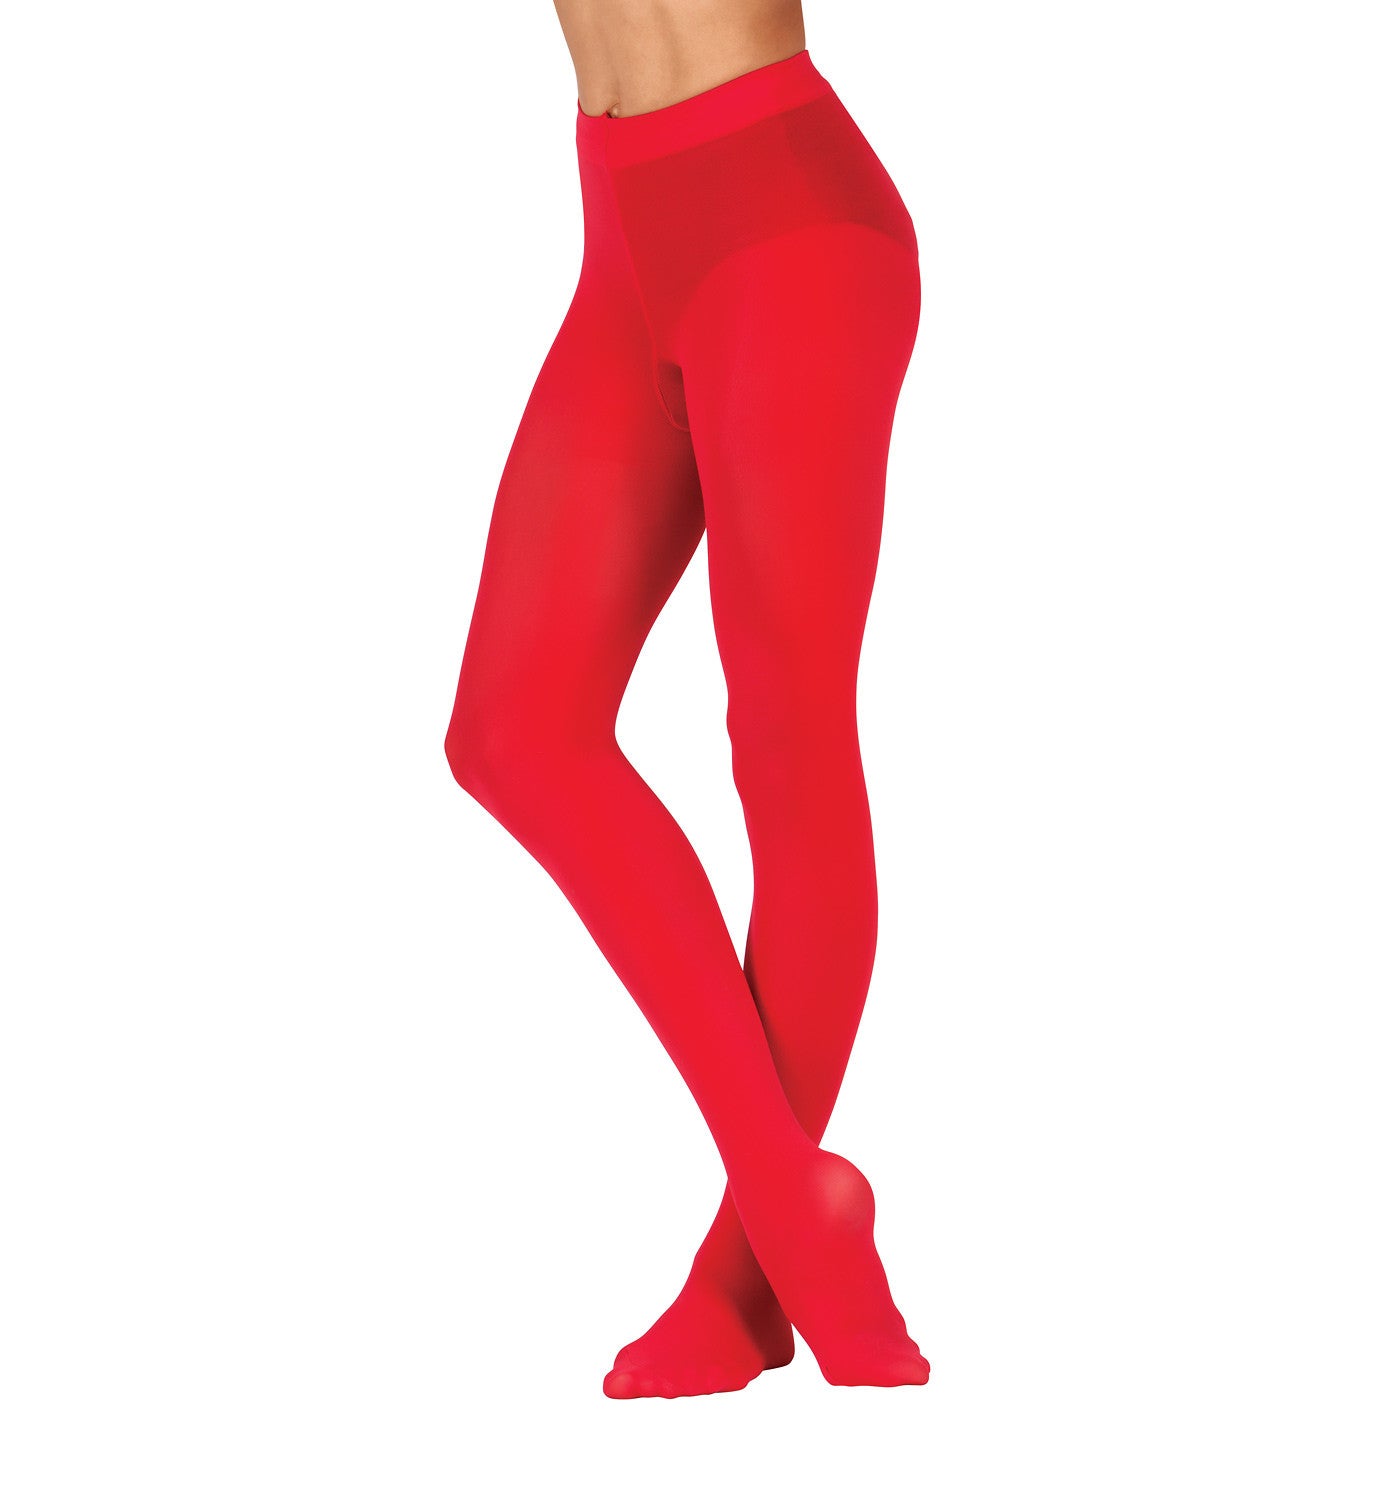 Theatricals Colored Footed Tights for Women